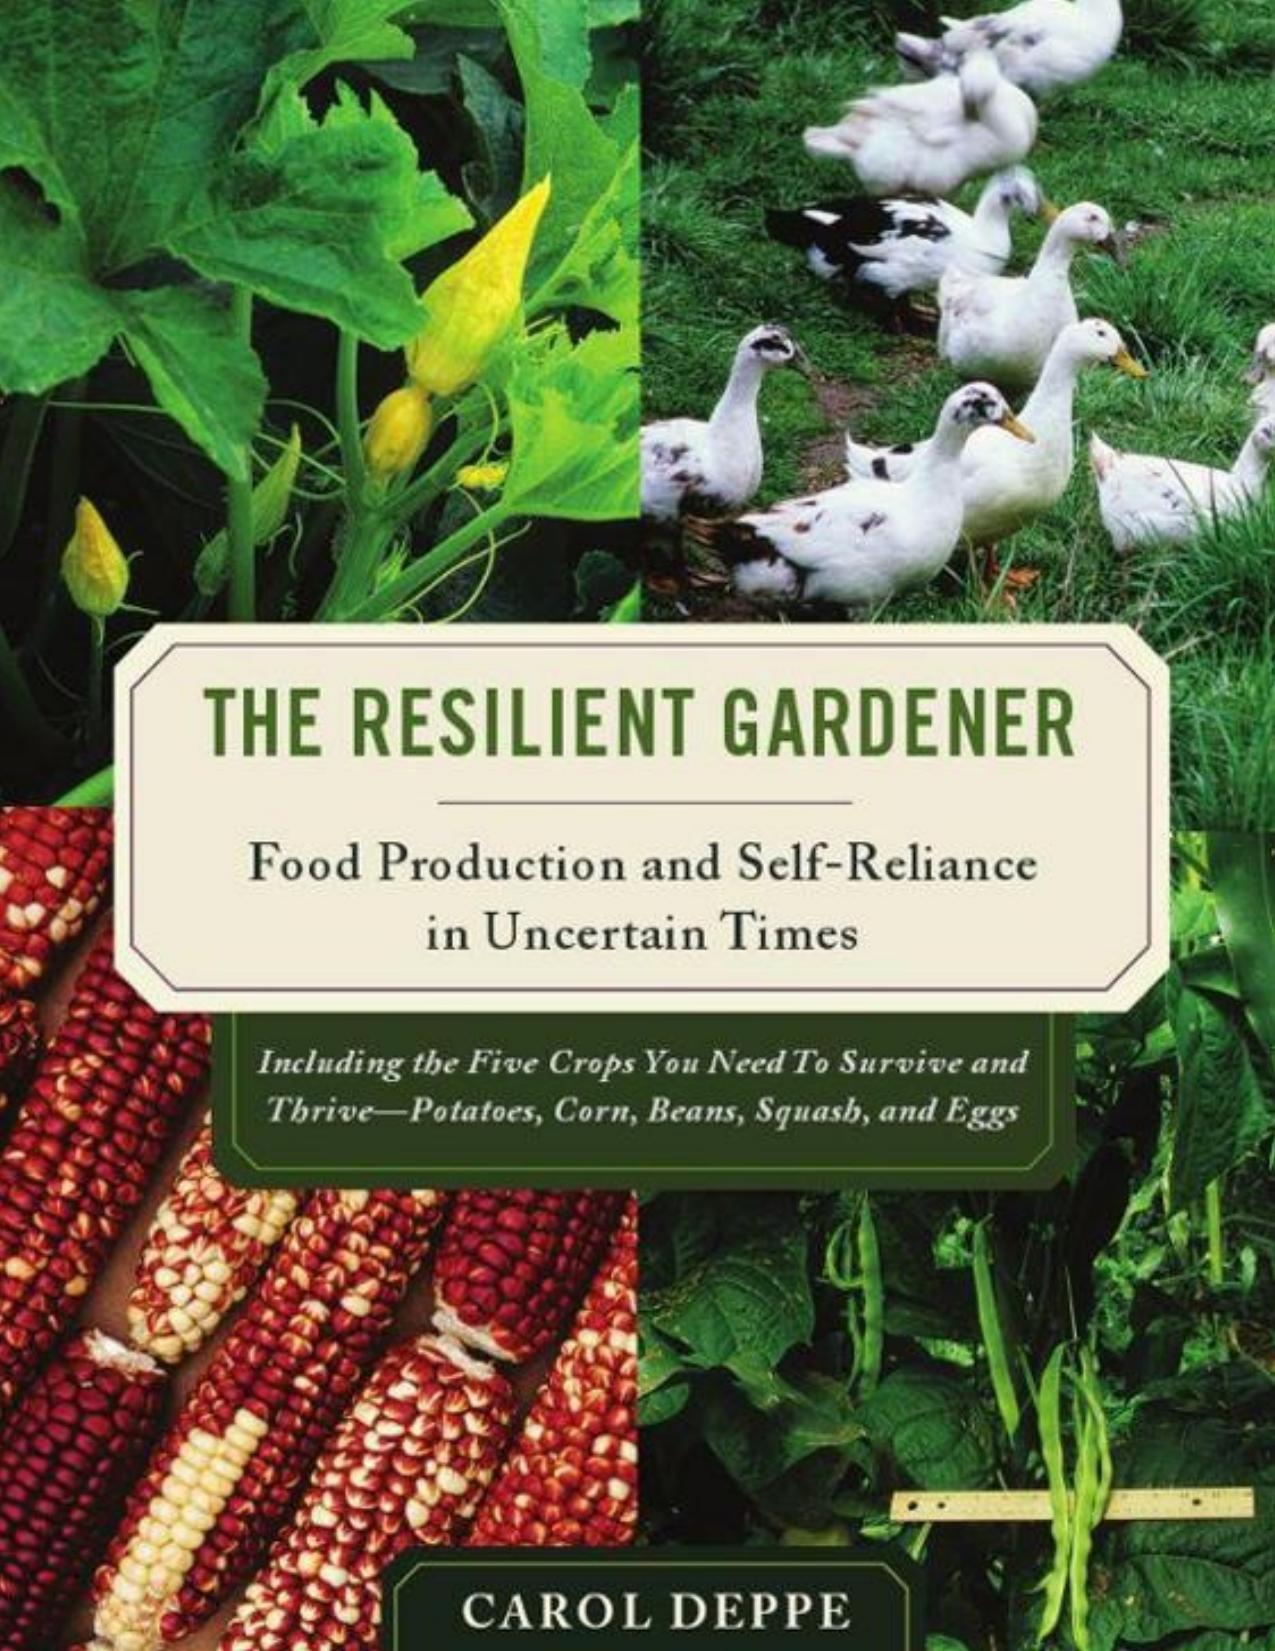 The Resilient Gardener: Food Production and Self-Reliance in Uncertain Times - PDFDrive.com